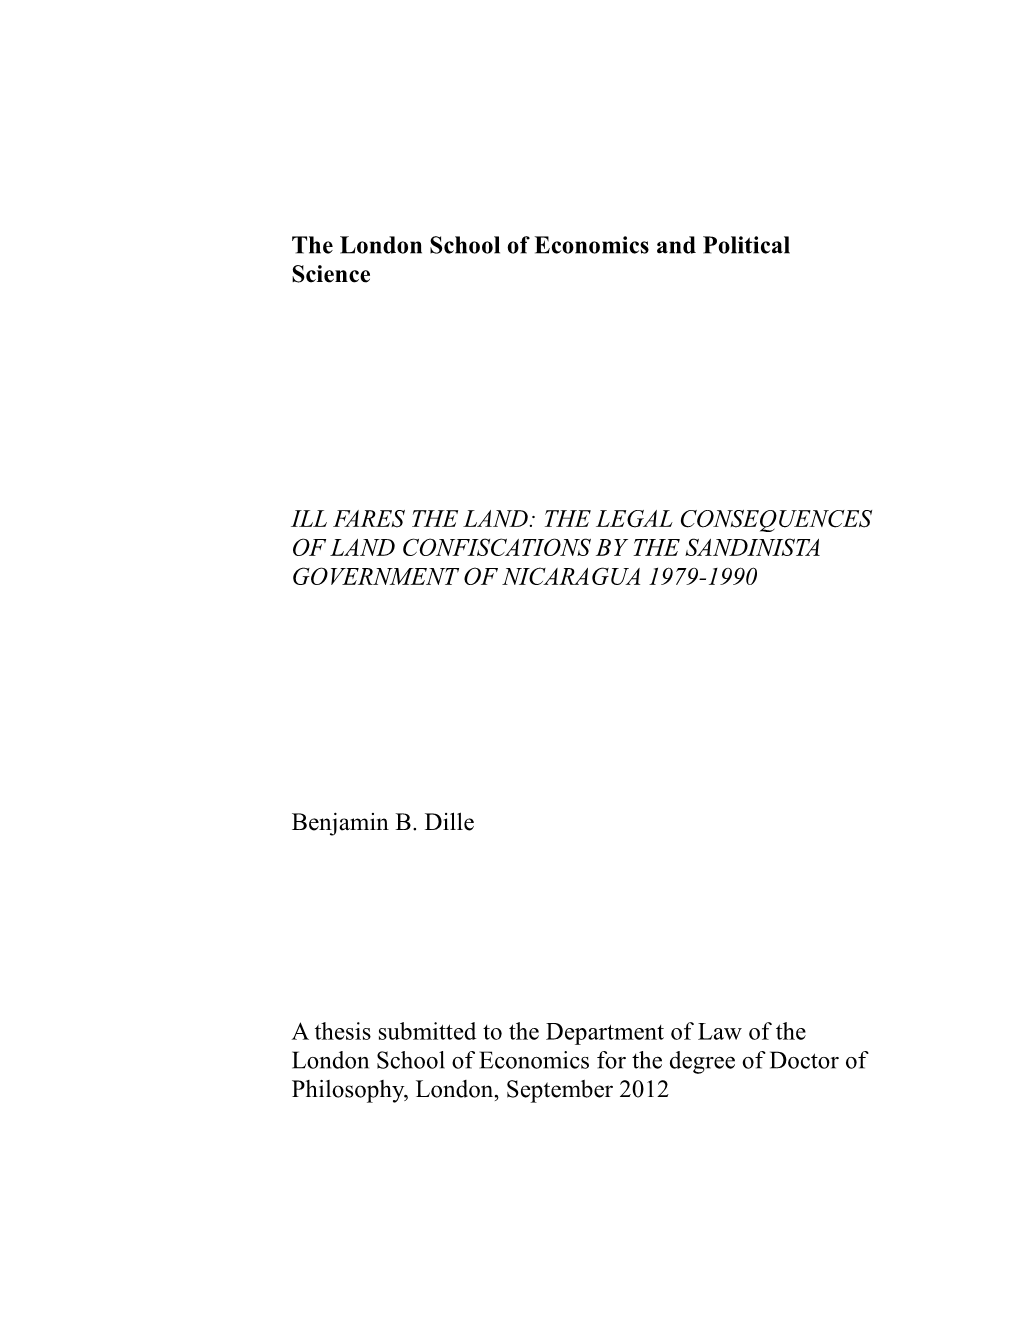 The London School of Economics and Political Science ILL FARES the LAND: the LEGAL CONSEQUENCES of LAND CONFISCATIONS by THE